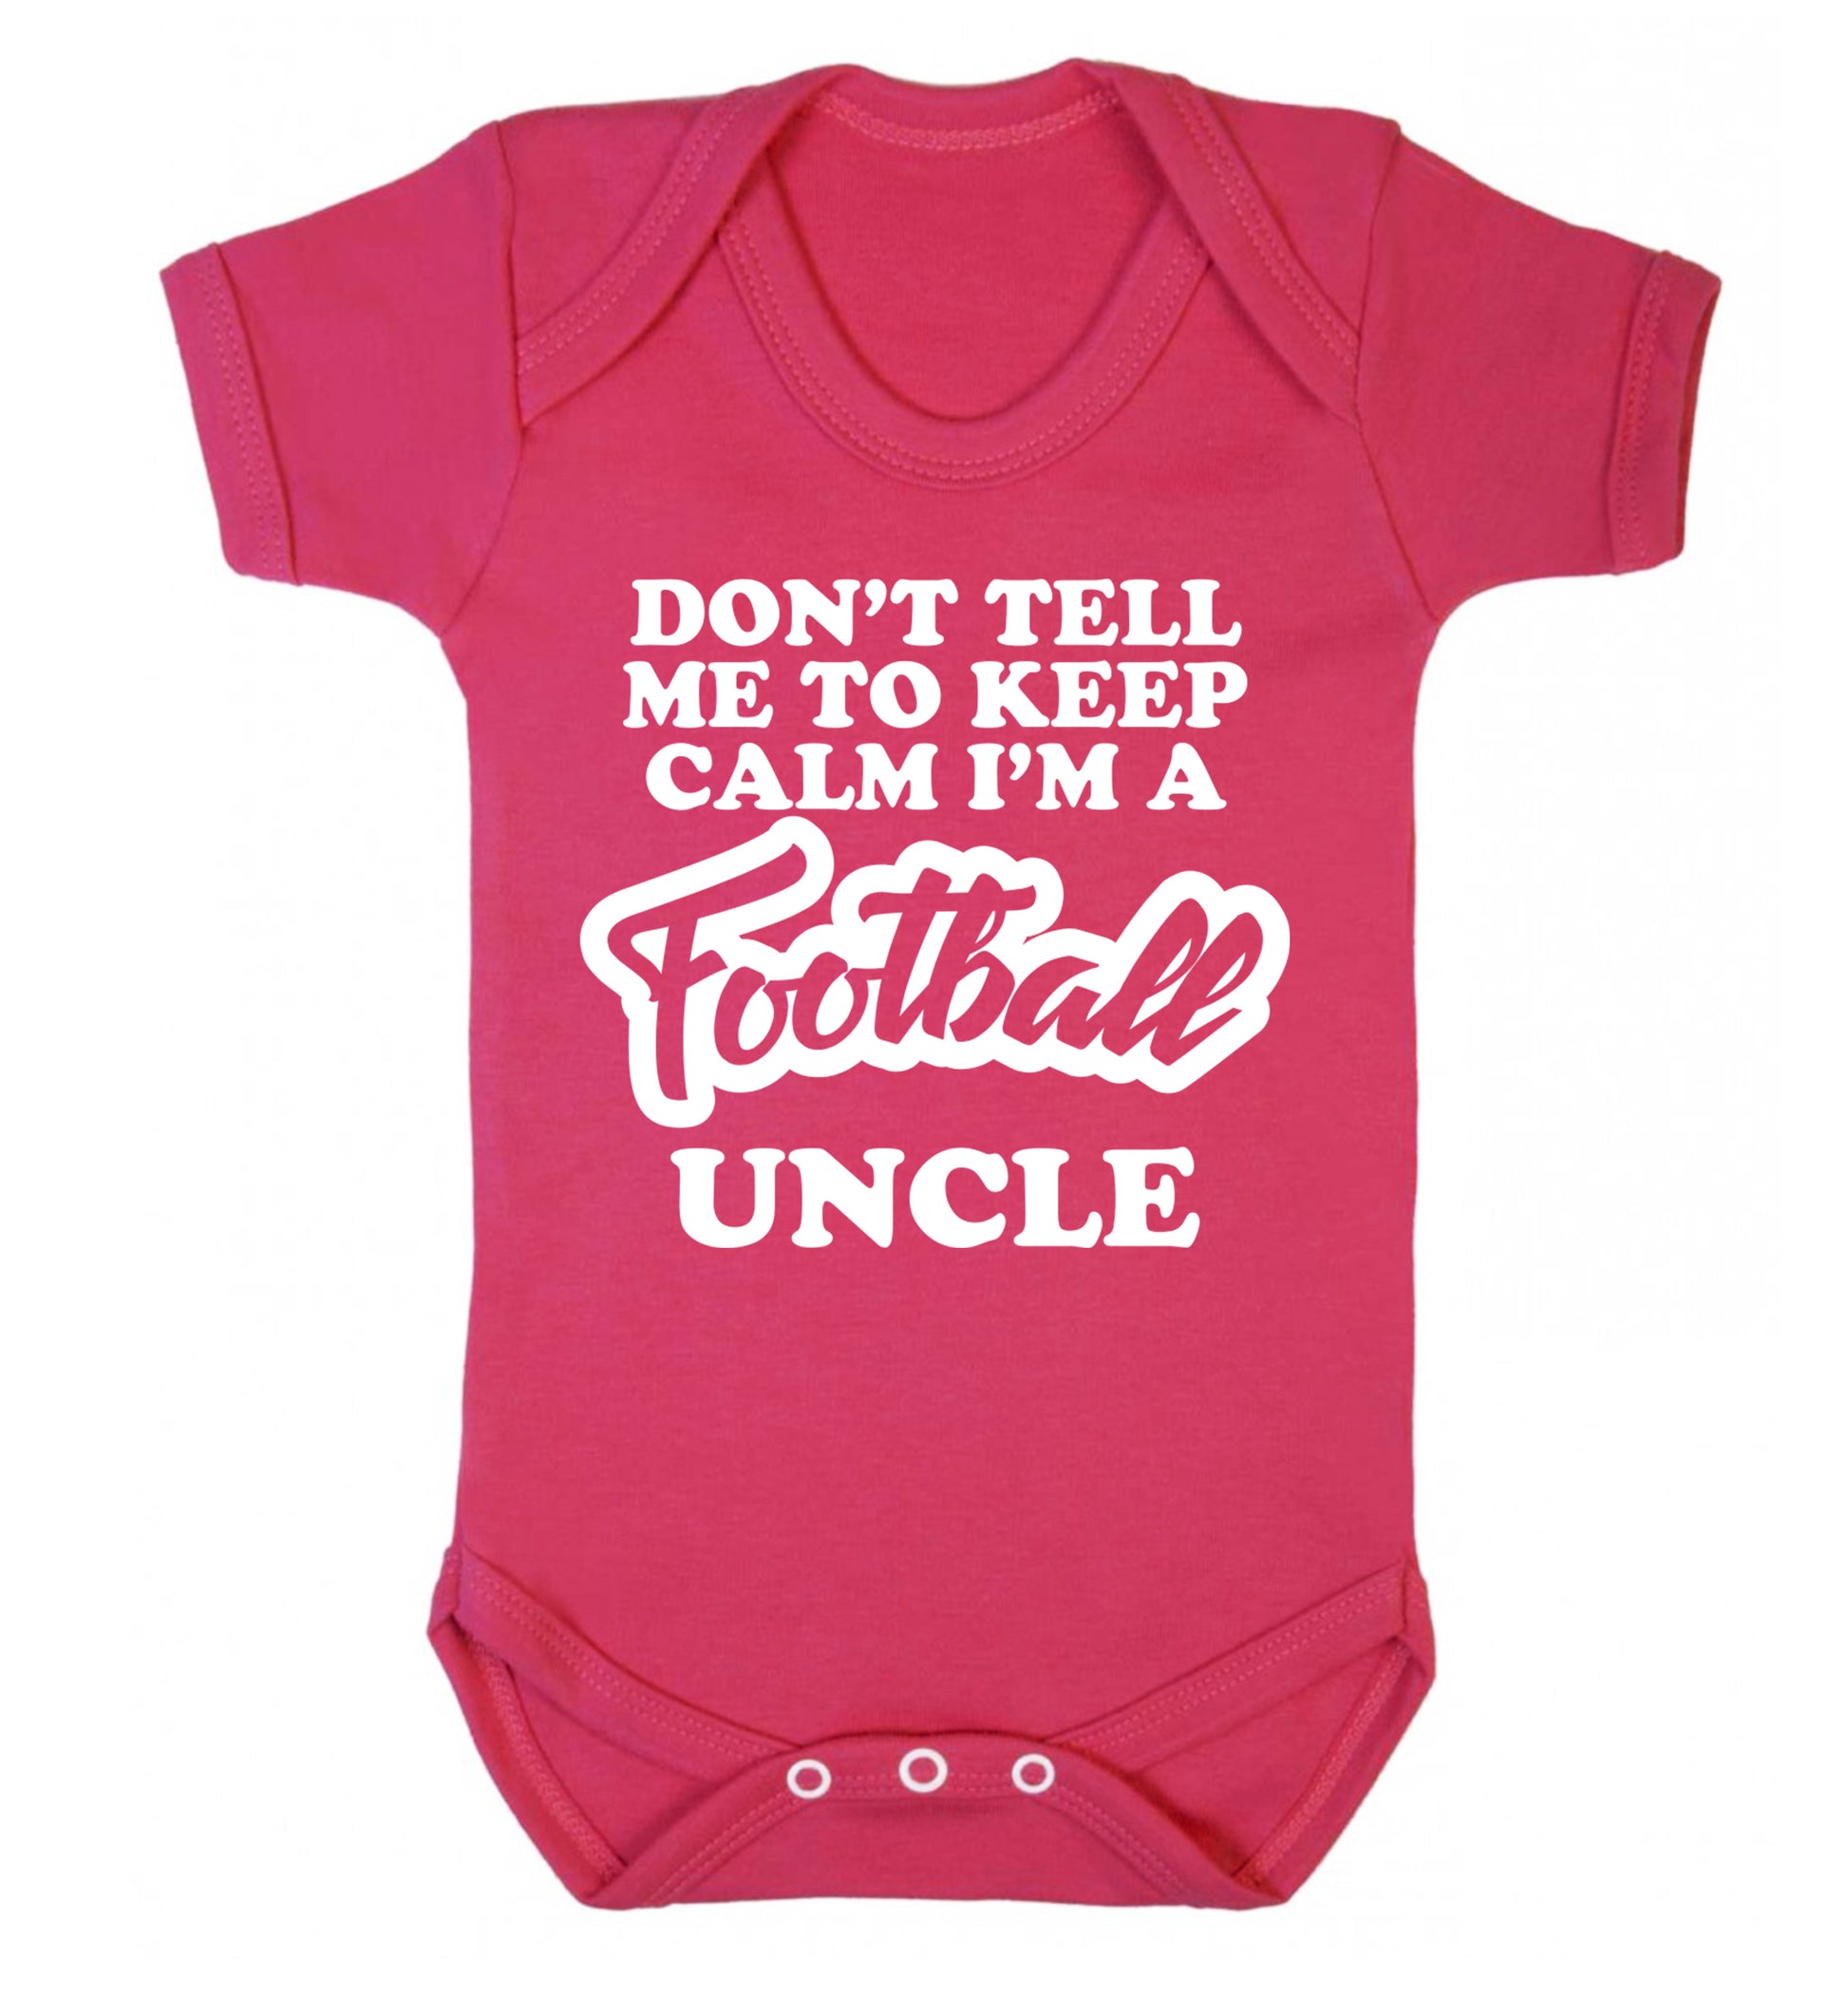 Don't tell me to keep calm I'm a football uncle Baby Vest dark pink 18-24 months